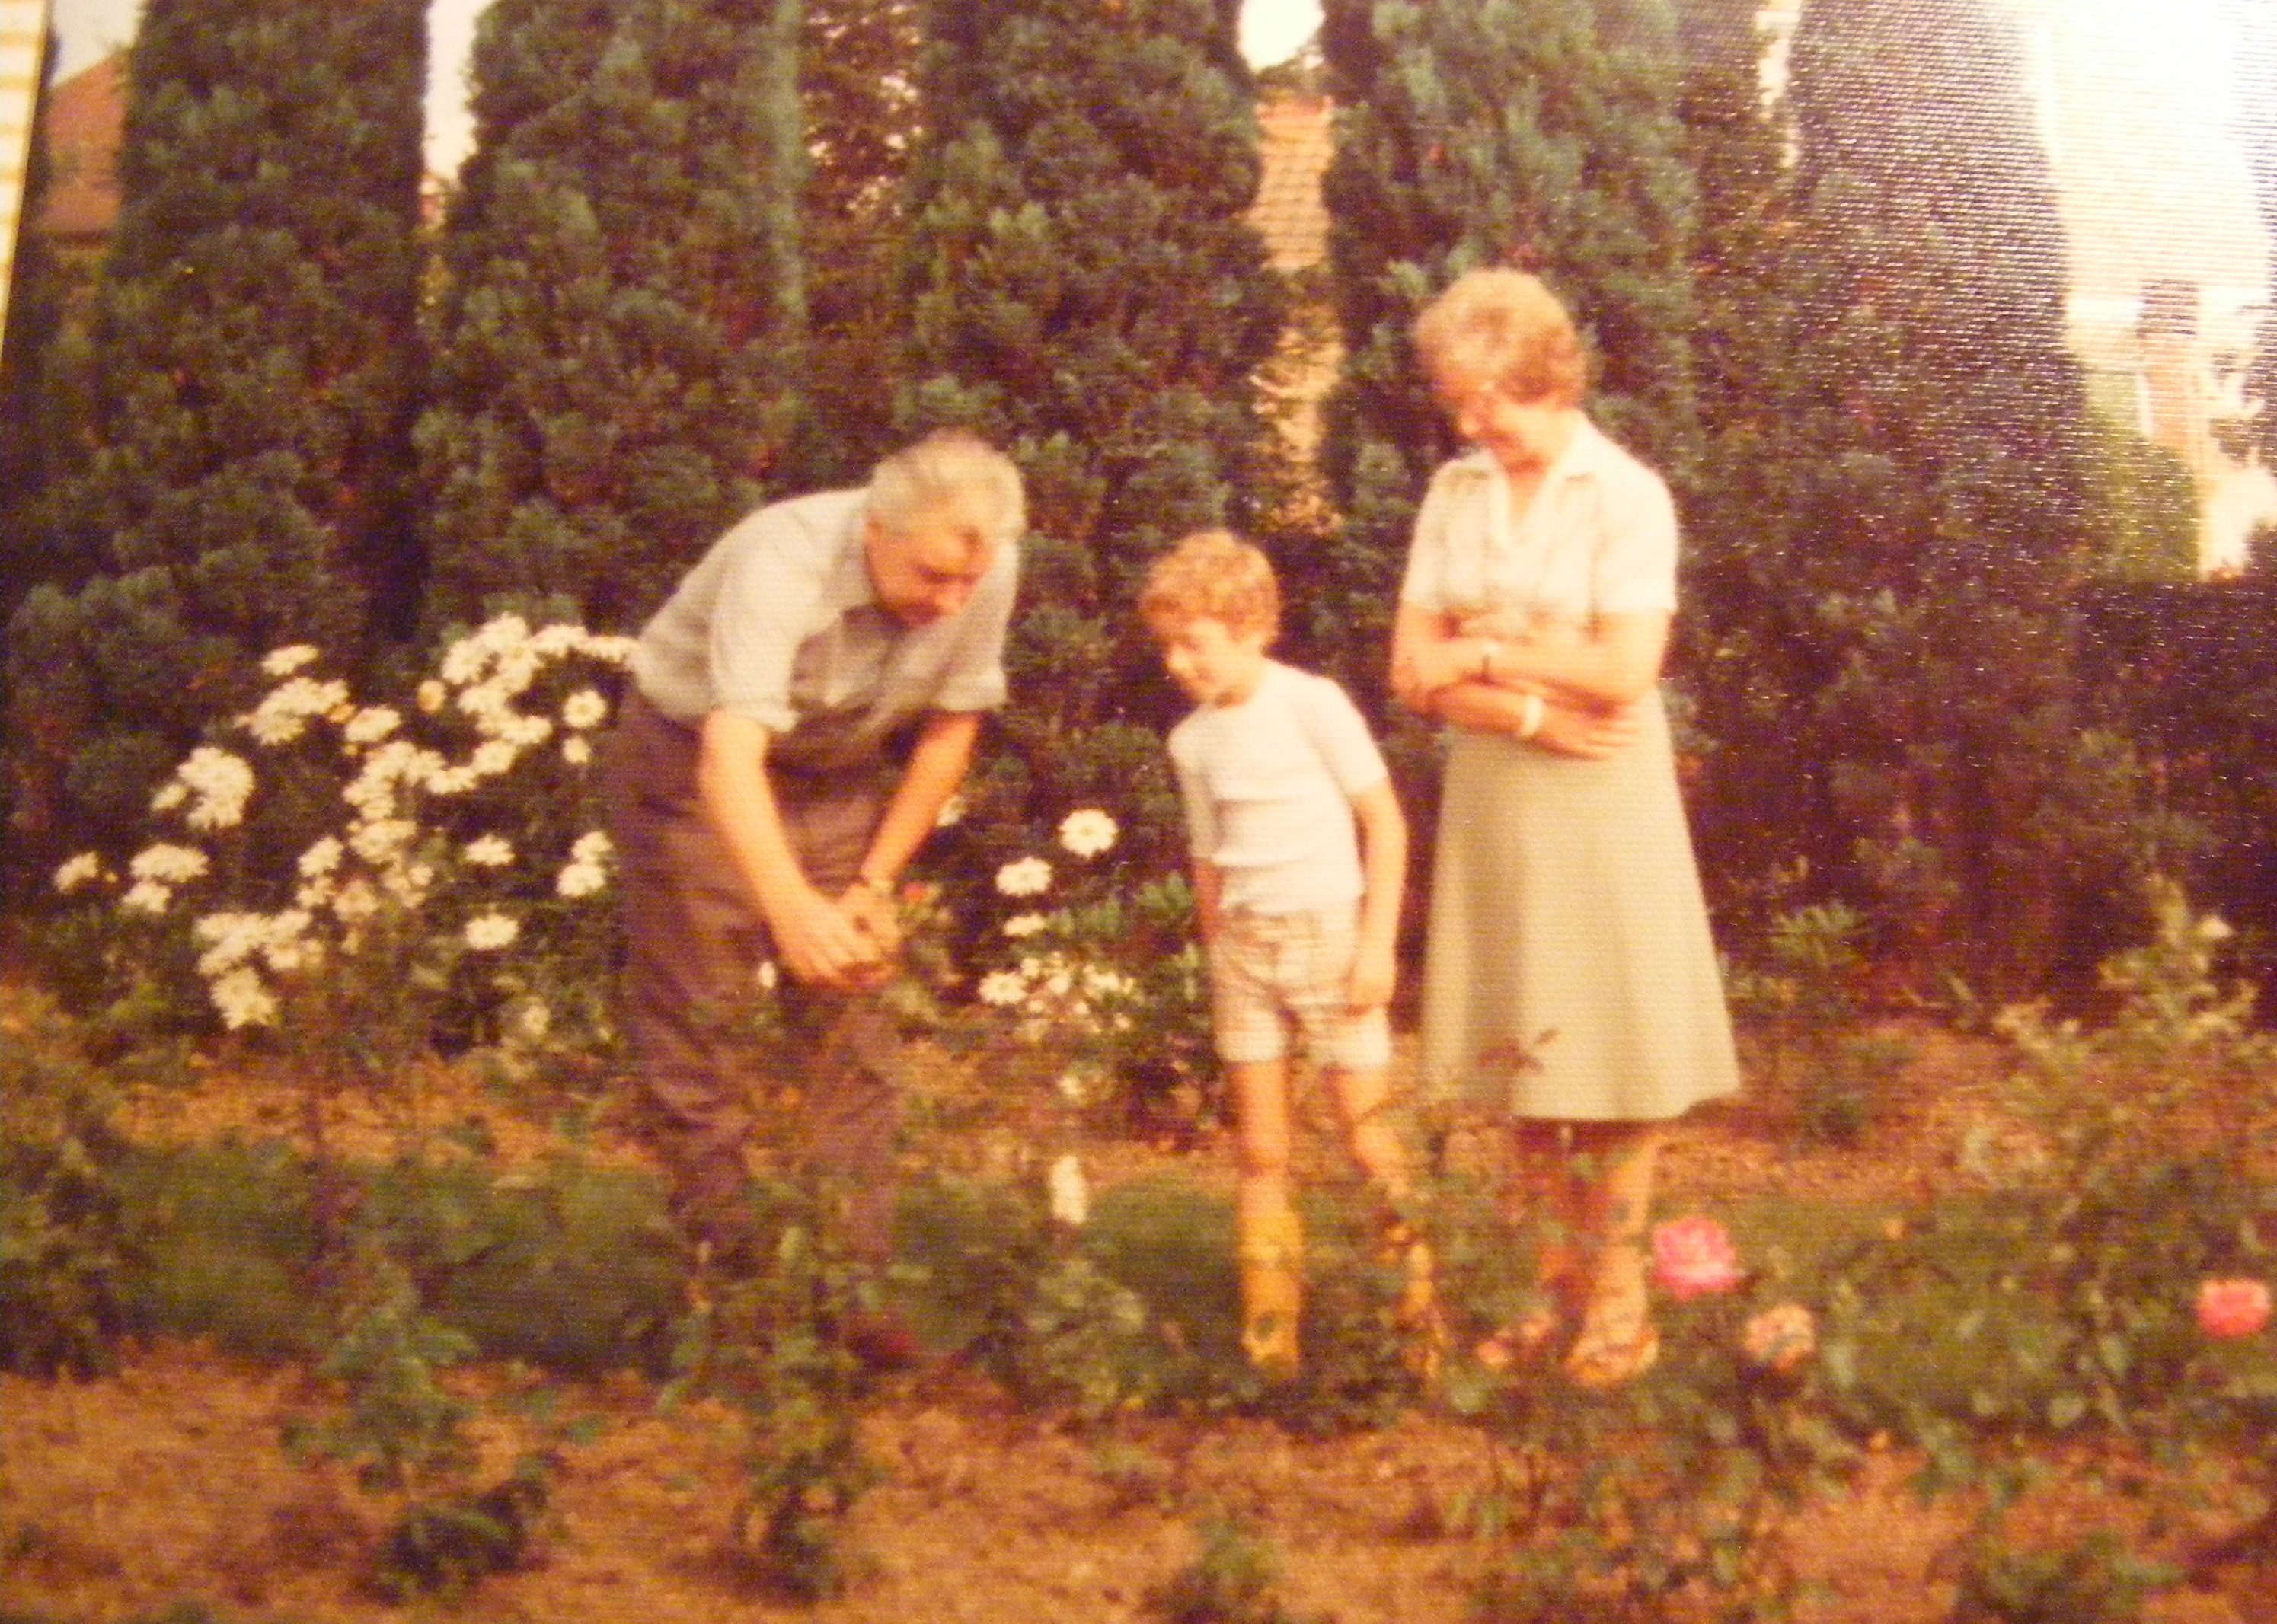 A sepia photo from the late 70s shows a Kew researcher as a child examining some garden plants